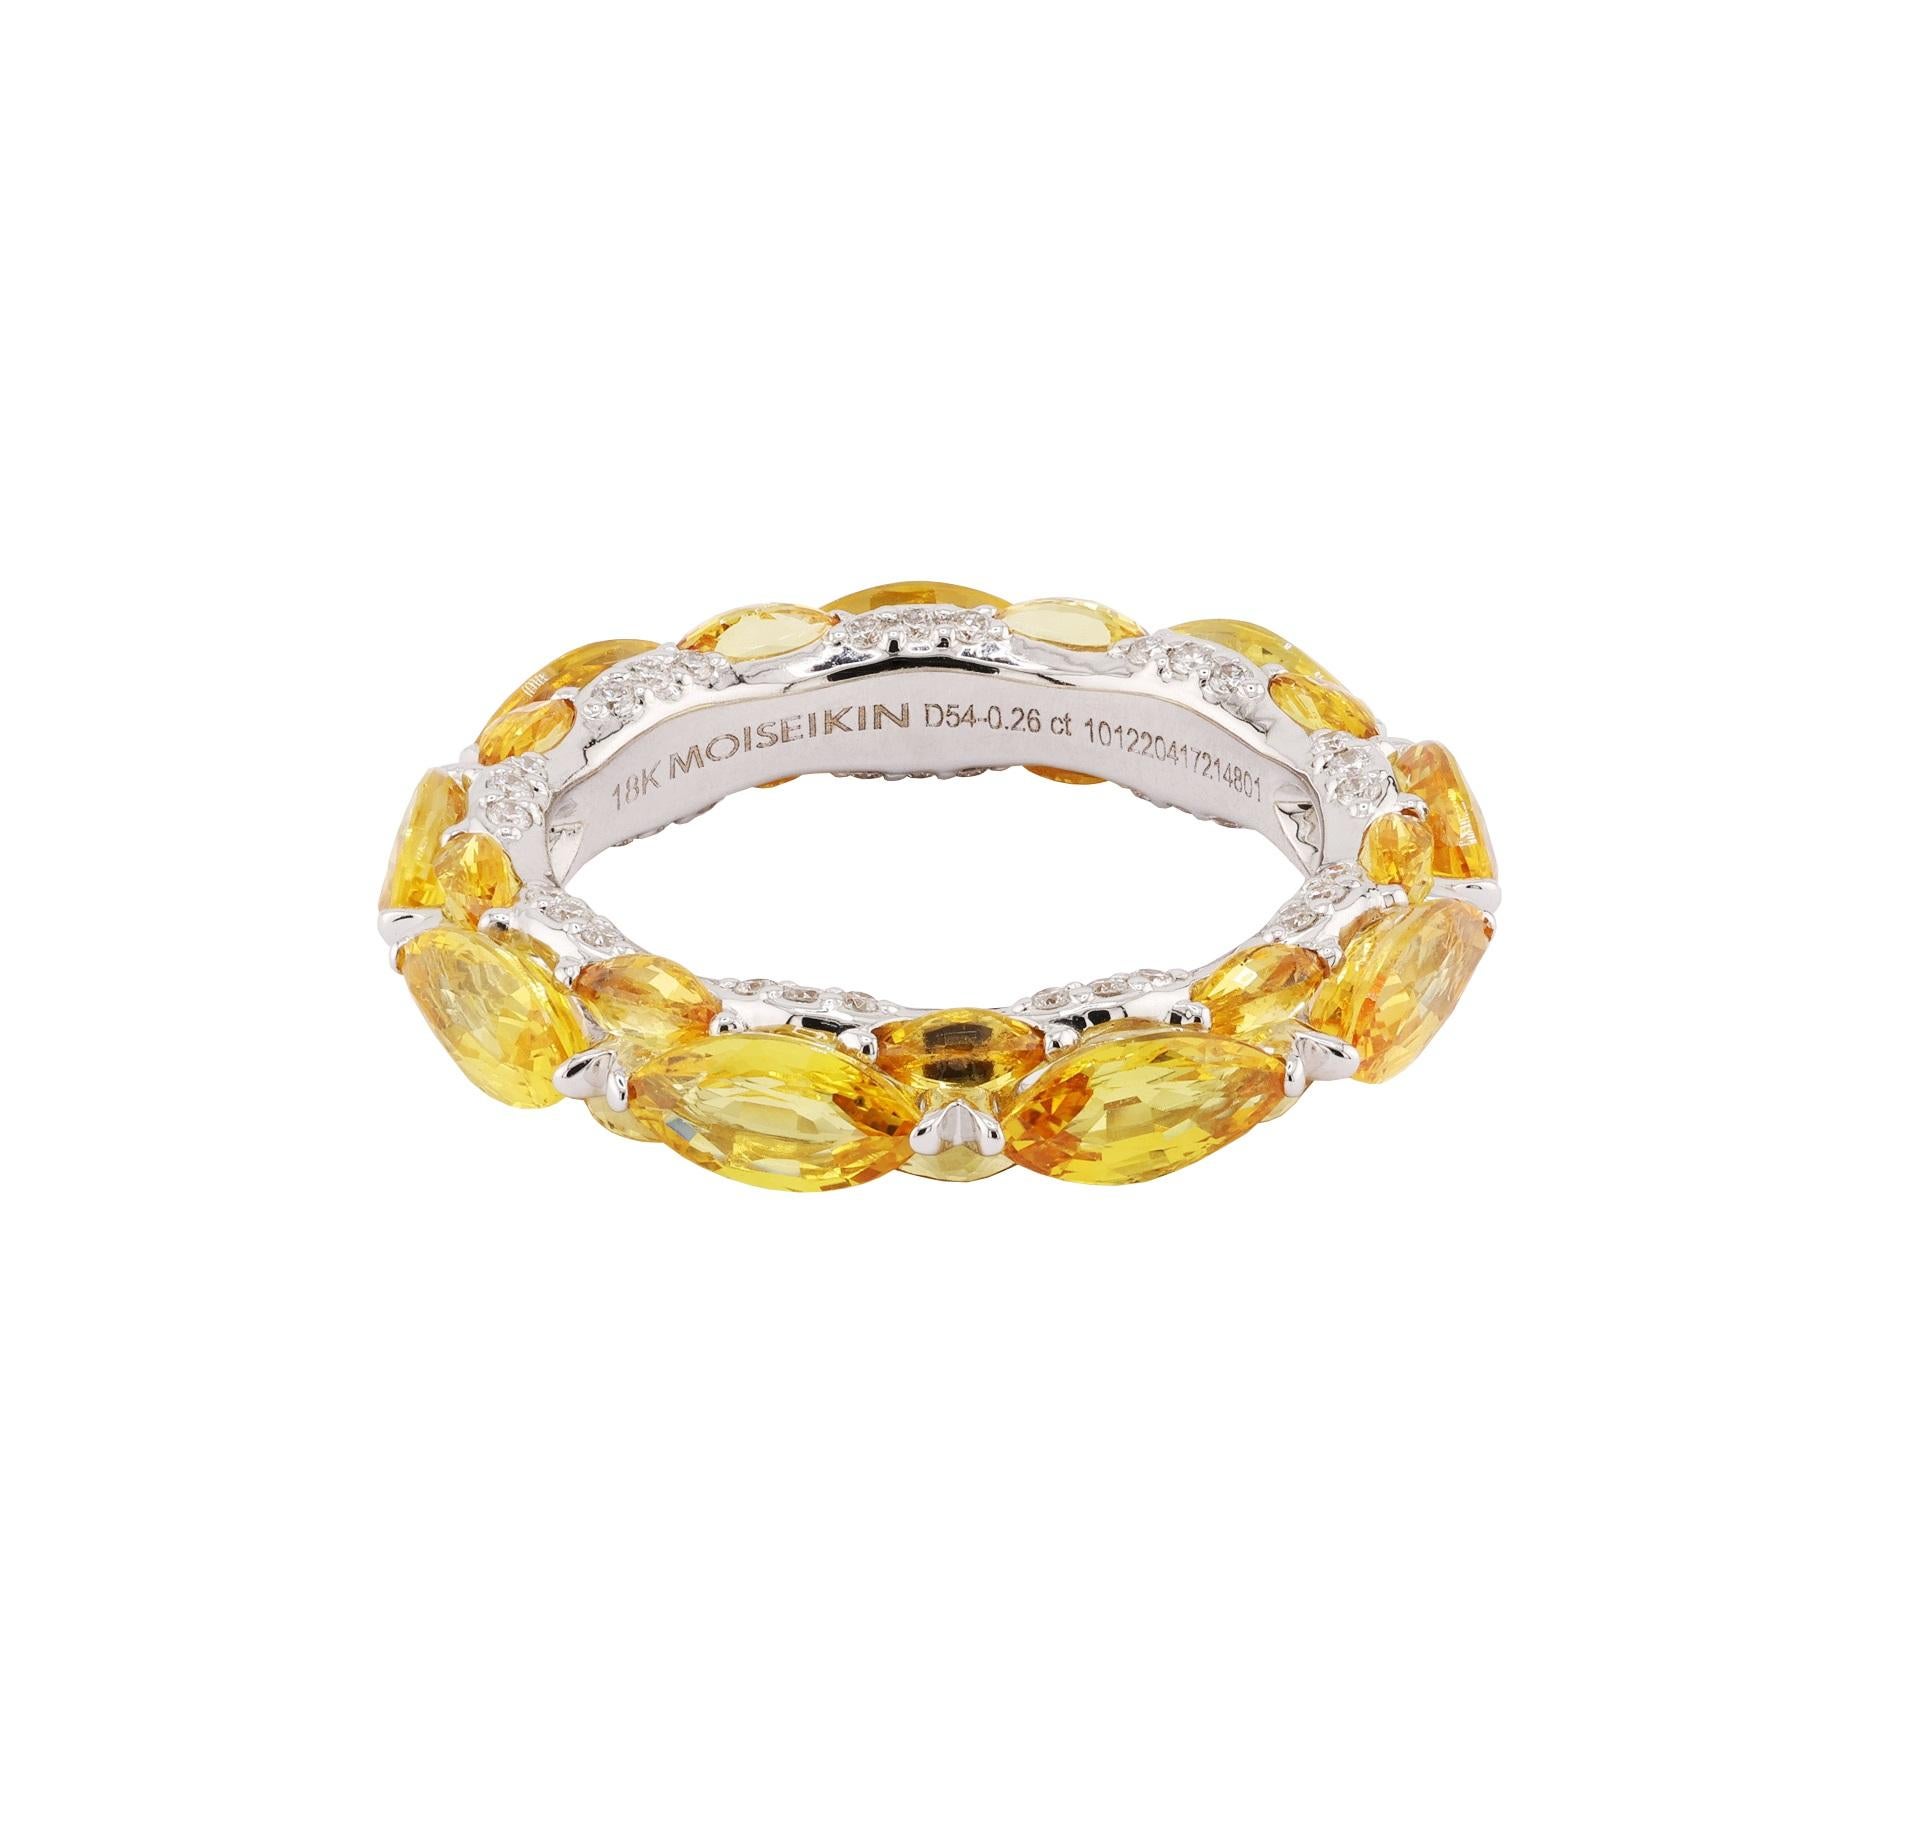 The gentle spring sun above,
Kissed your radiant smile.
In its shimmering dance,
It began to play
The melody of light spun on the wave.

Meet the latest addition to MOISEIKIN's Harmony of Water collection: the Vibrant Yellow Sapphire Eternity Ring.